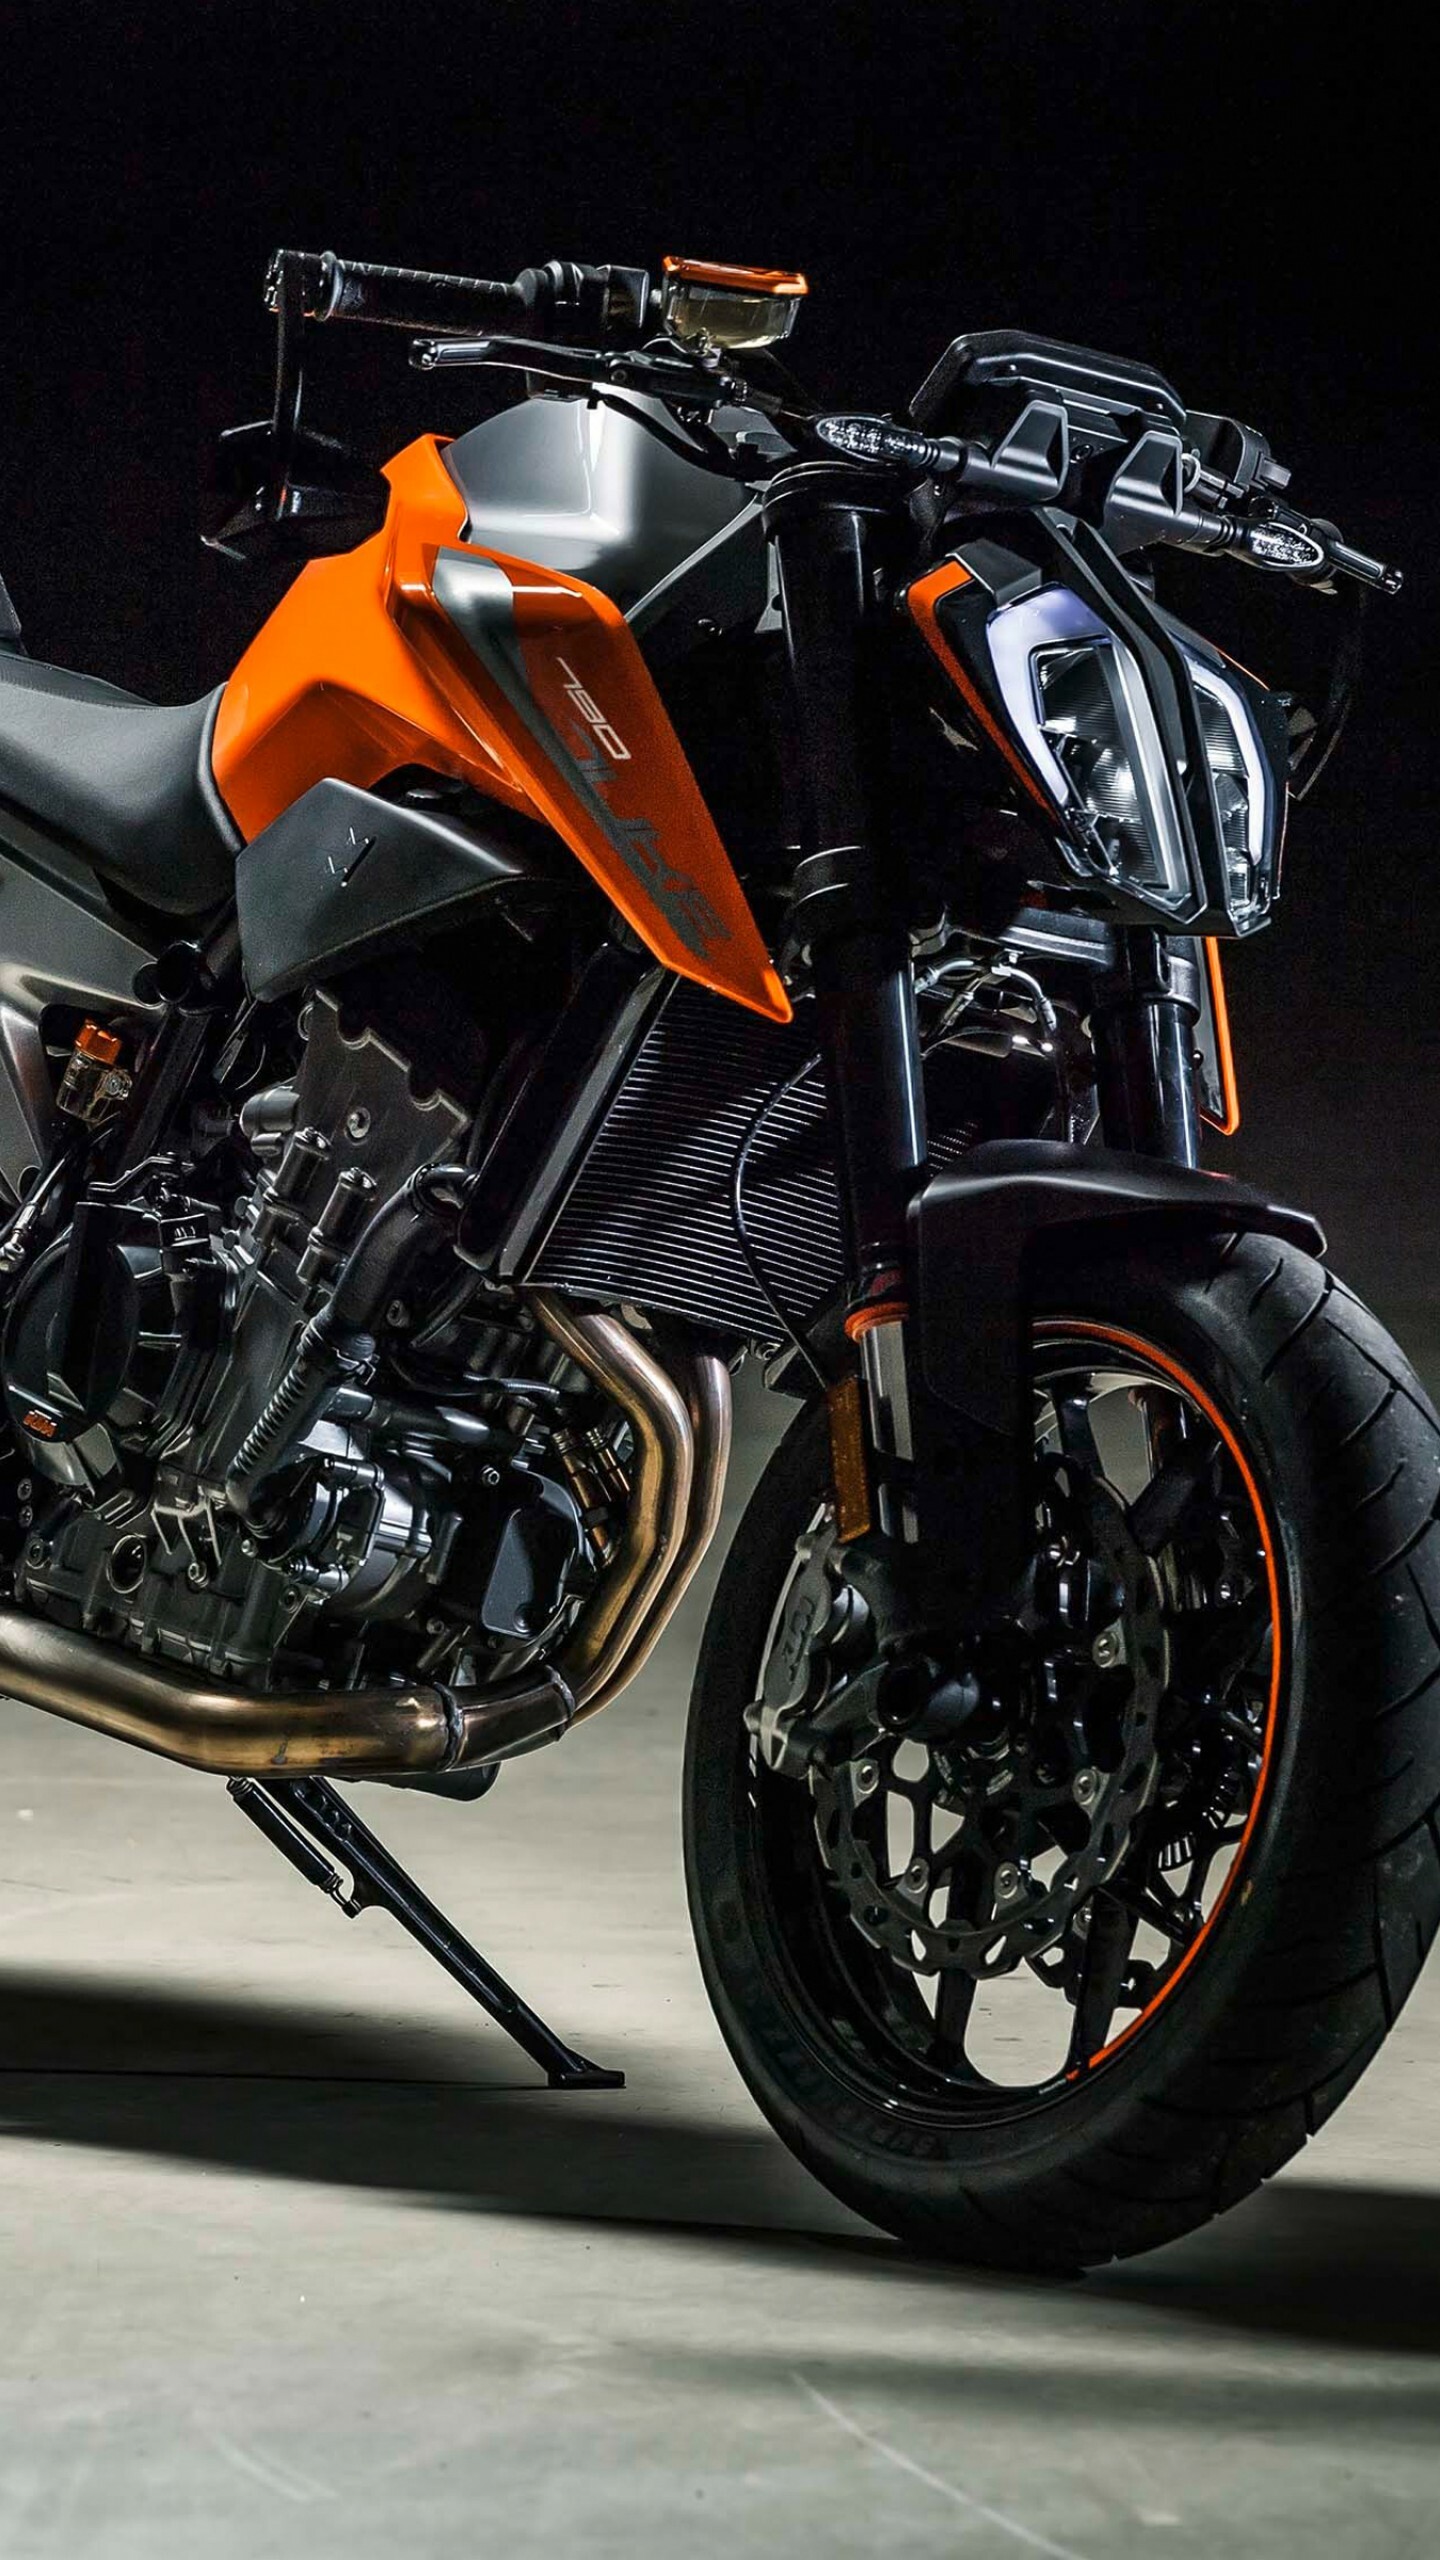 Bike: KTM 790 Duke, Motorcycle, manufactured by KTM from 2017. 1440x2560 HD Background.